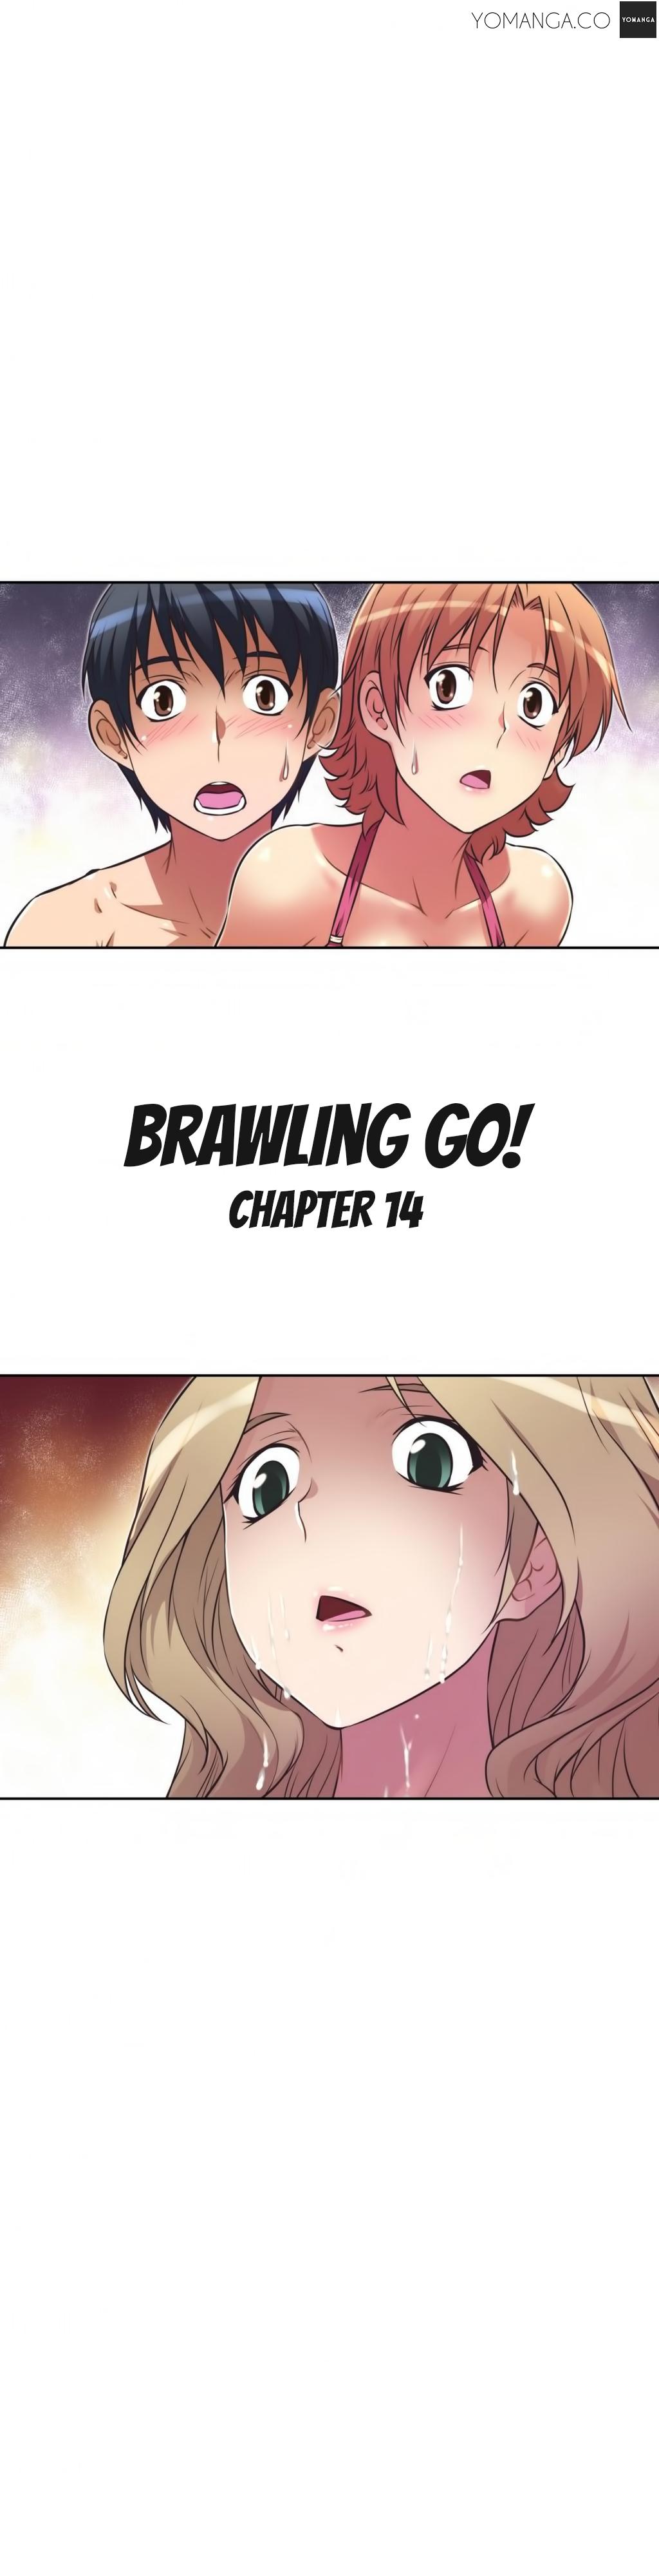 Brawling Go 0-14 Chapters 468